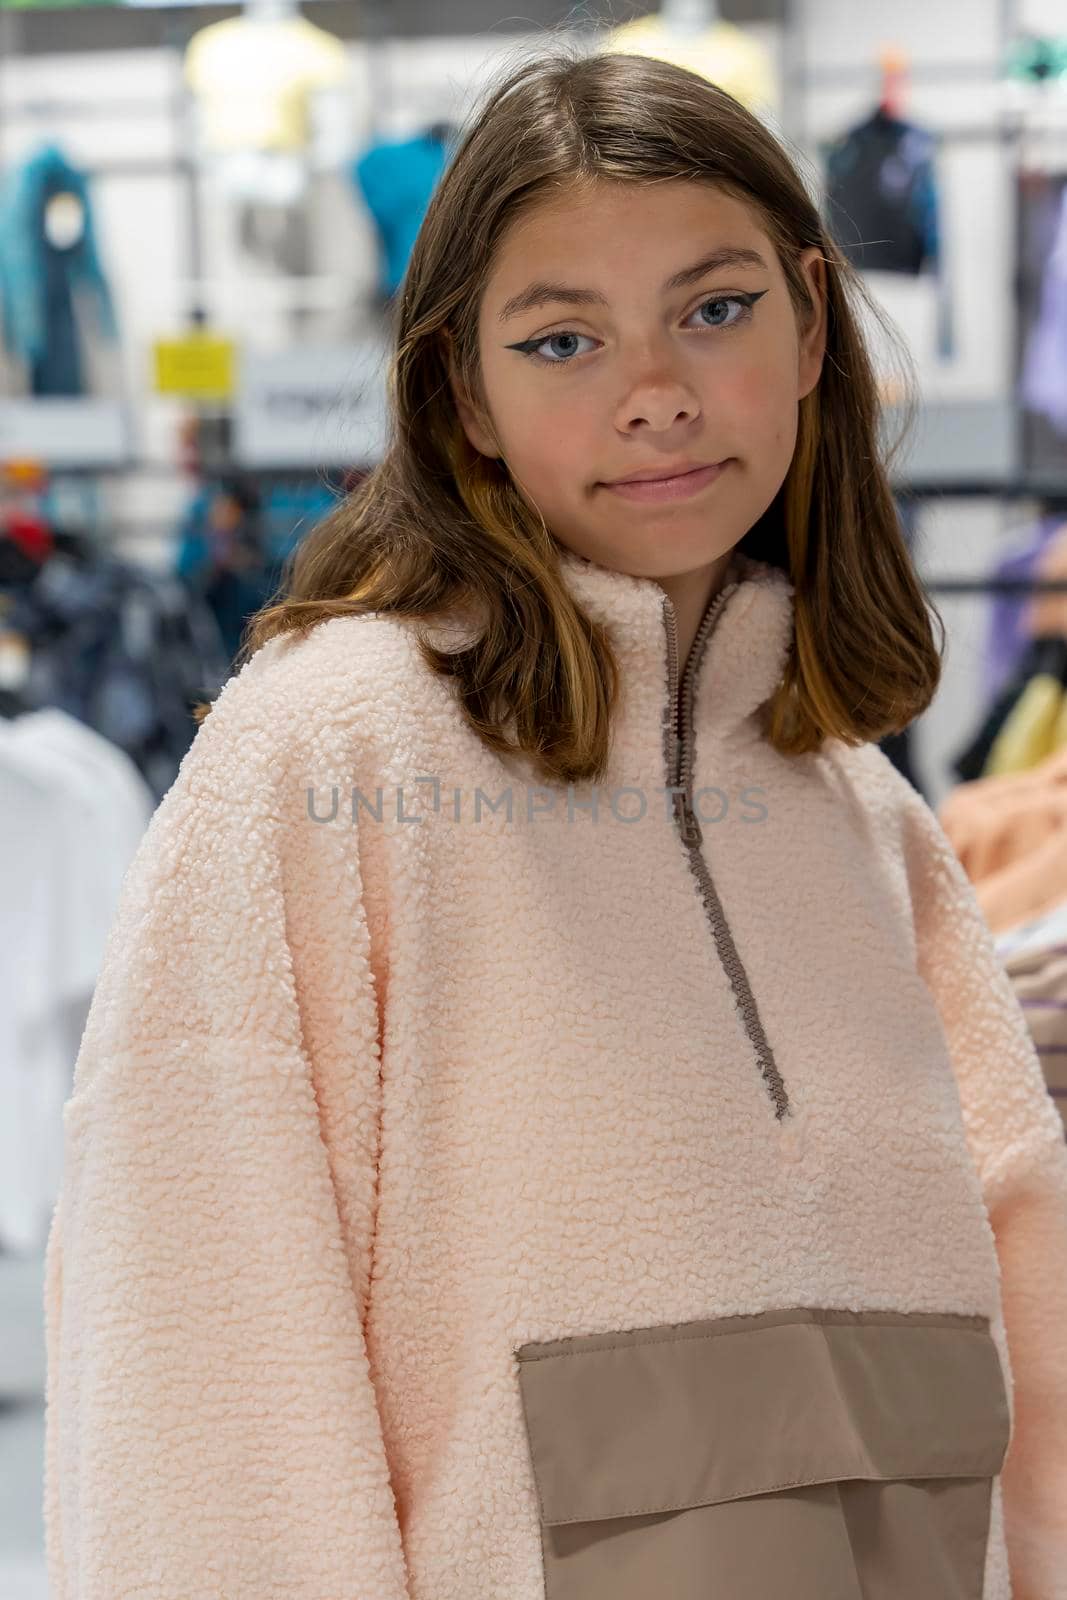 beautiful girl in a clothing store tries on a fashionable sweatshirt by audiznam2609